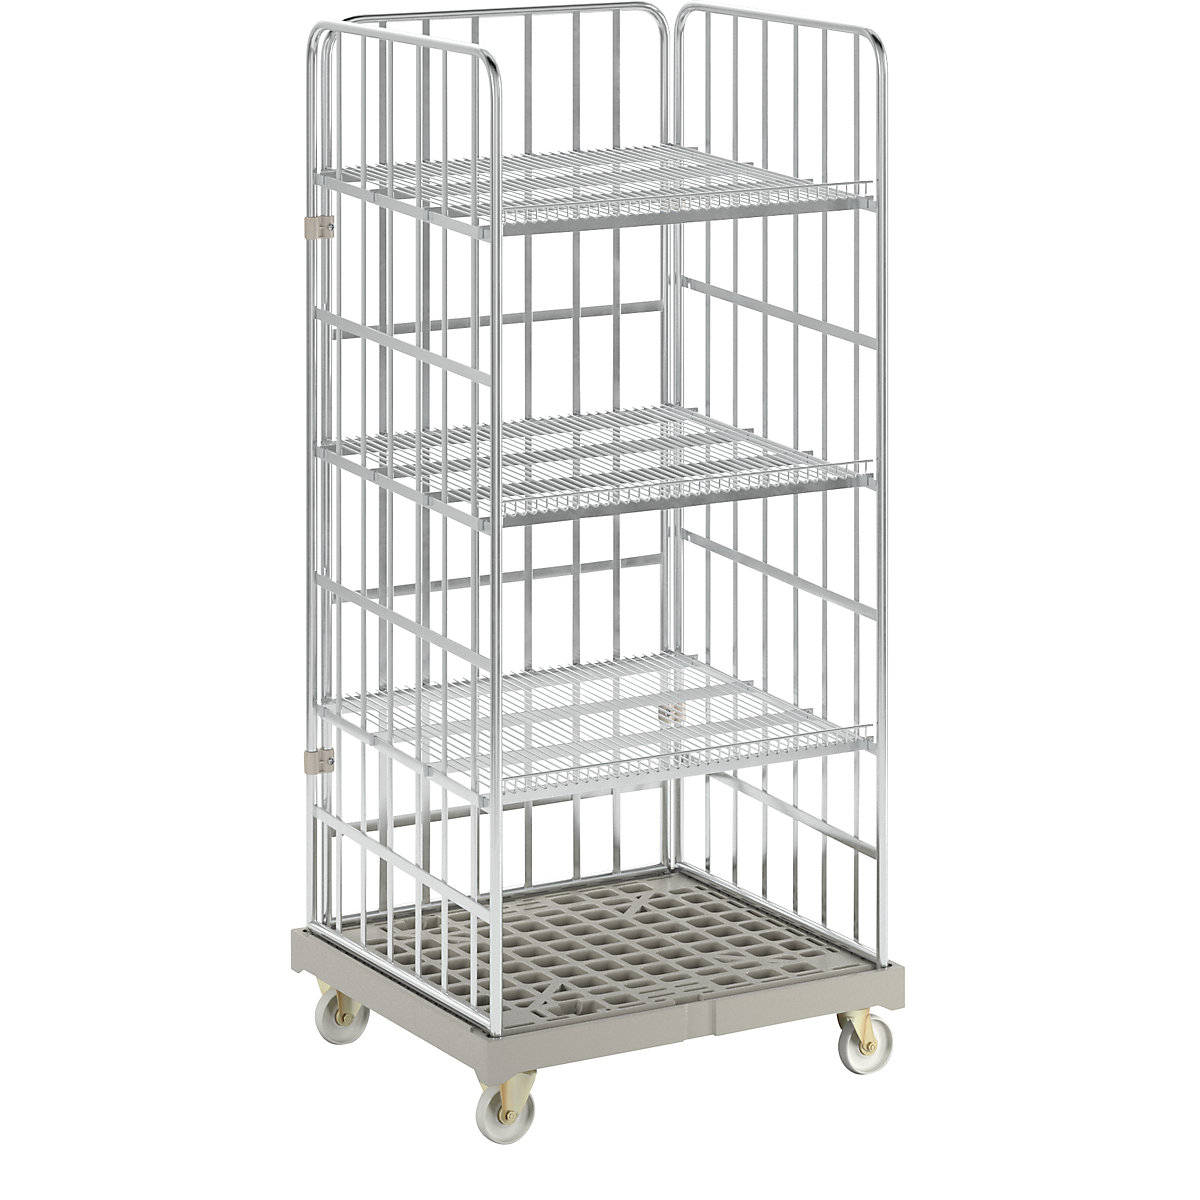 Roll cage incl. shelves, plastic transport base, grey dolly-3